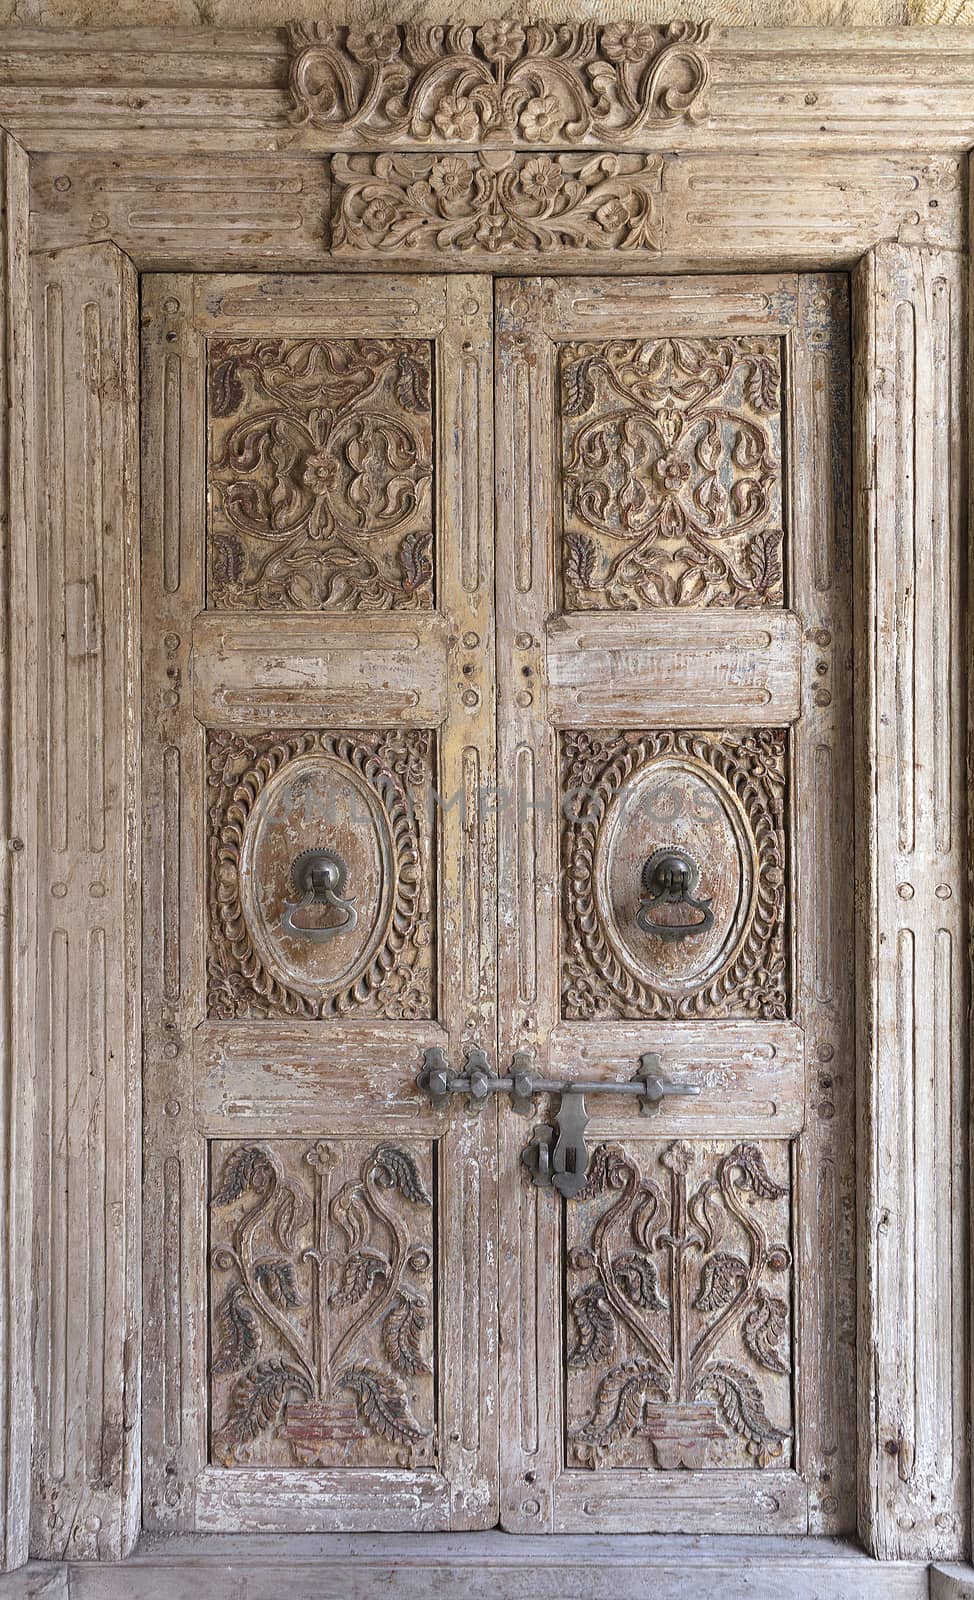 Ancient antique wooden doors with metal handles and a lock in the middle by Sergii